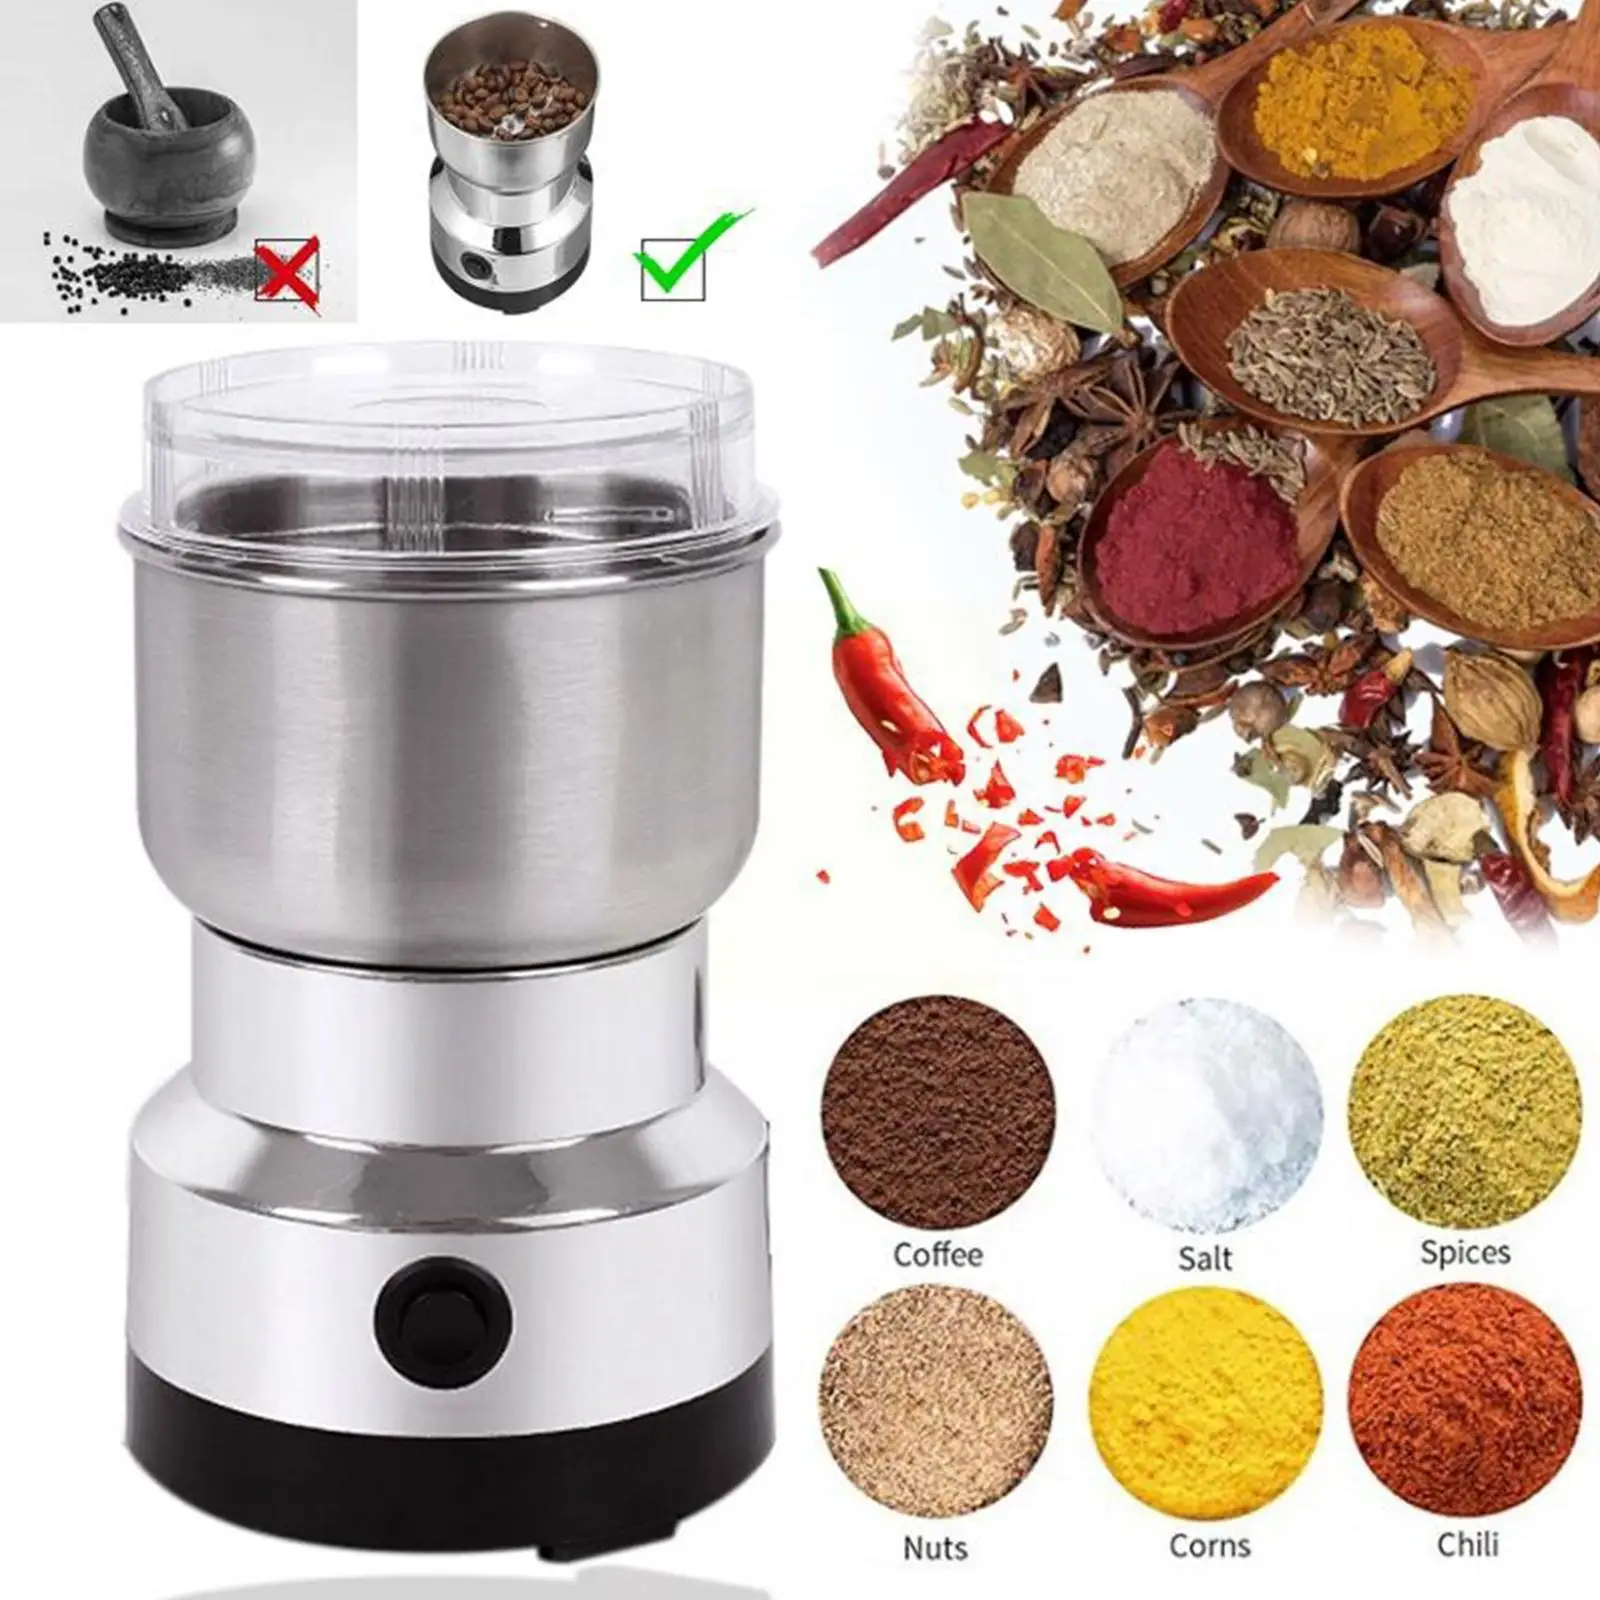 

Electric Coffee Grinder 150w 220v Kitchen Cereals Beans Nuts Bean Coffee Spices Multifunctional Machine Home Grinding Grind W4v2